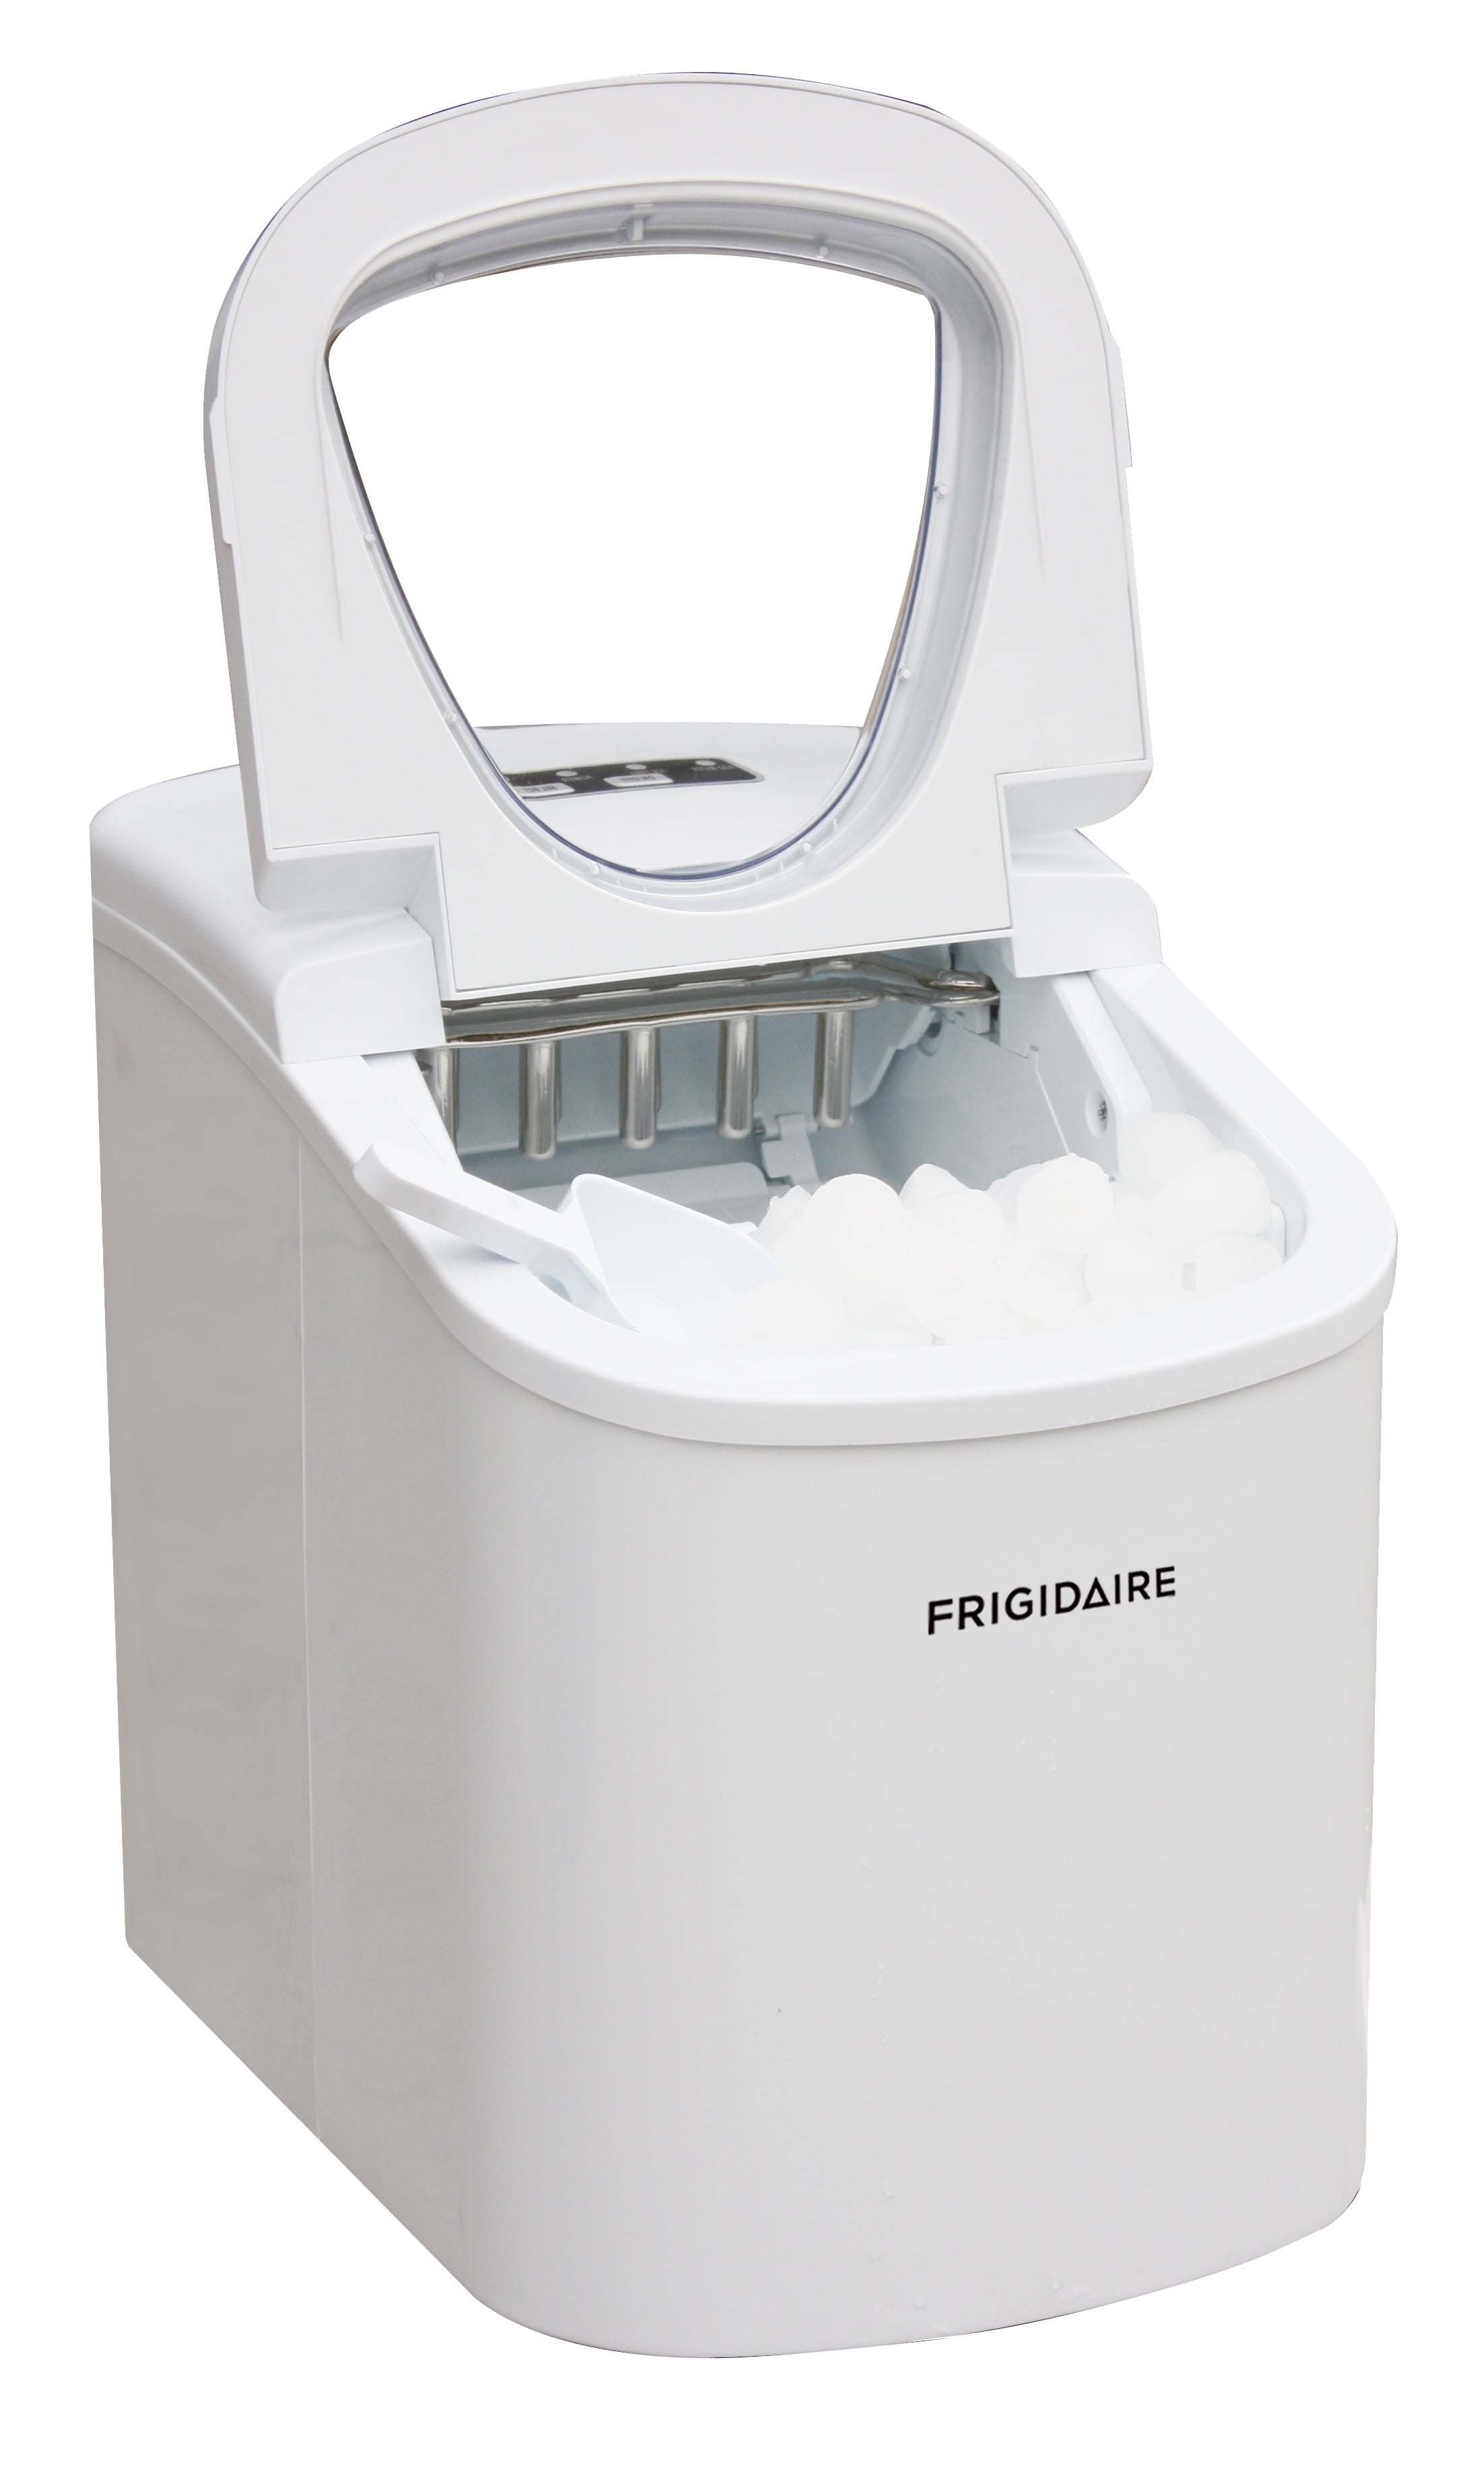 Frigidaire Extra Large Portable Kitchen Countertop Ice Cube Maker  Machine,Silver, 1 Piece - Kroger